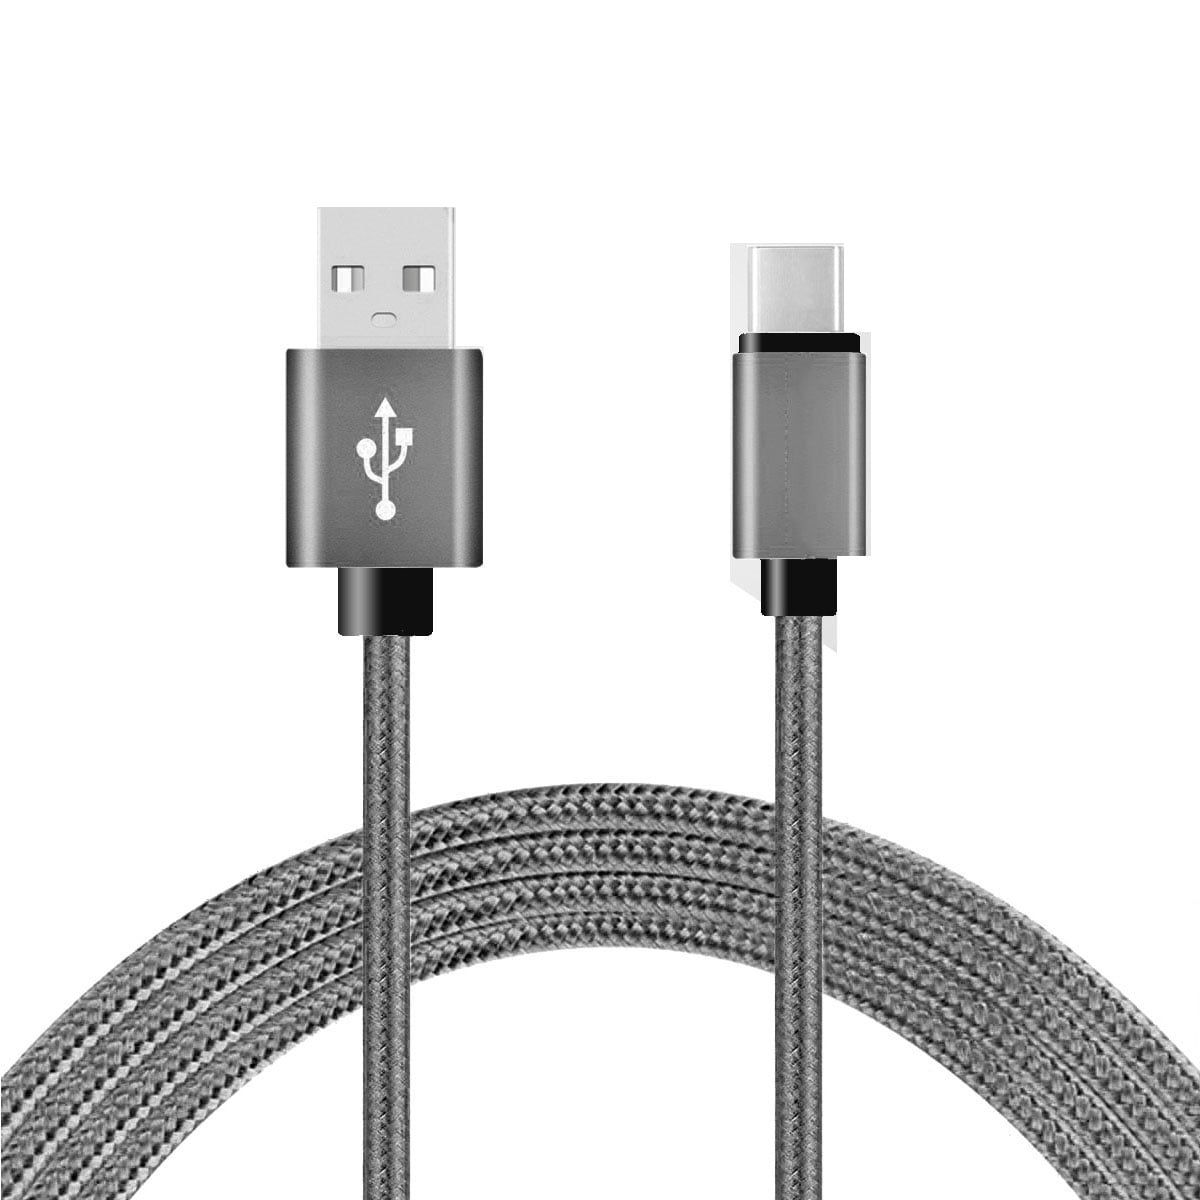 Fast Quick Charging MicroUSB Cable works with Alcatel Idol 4 is 5ft/1.5M allows fast charging Speeds! 